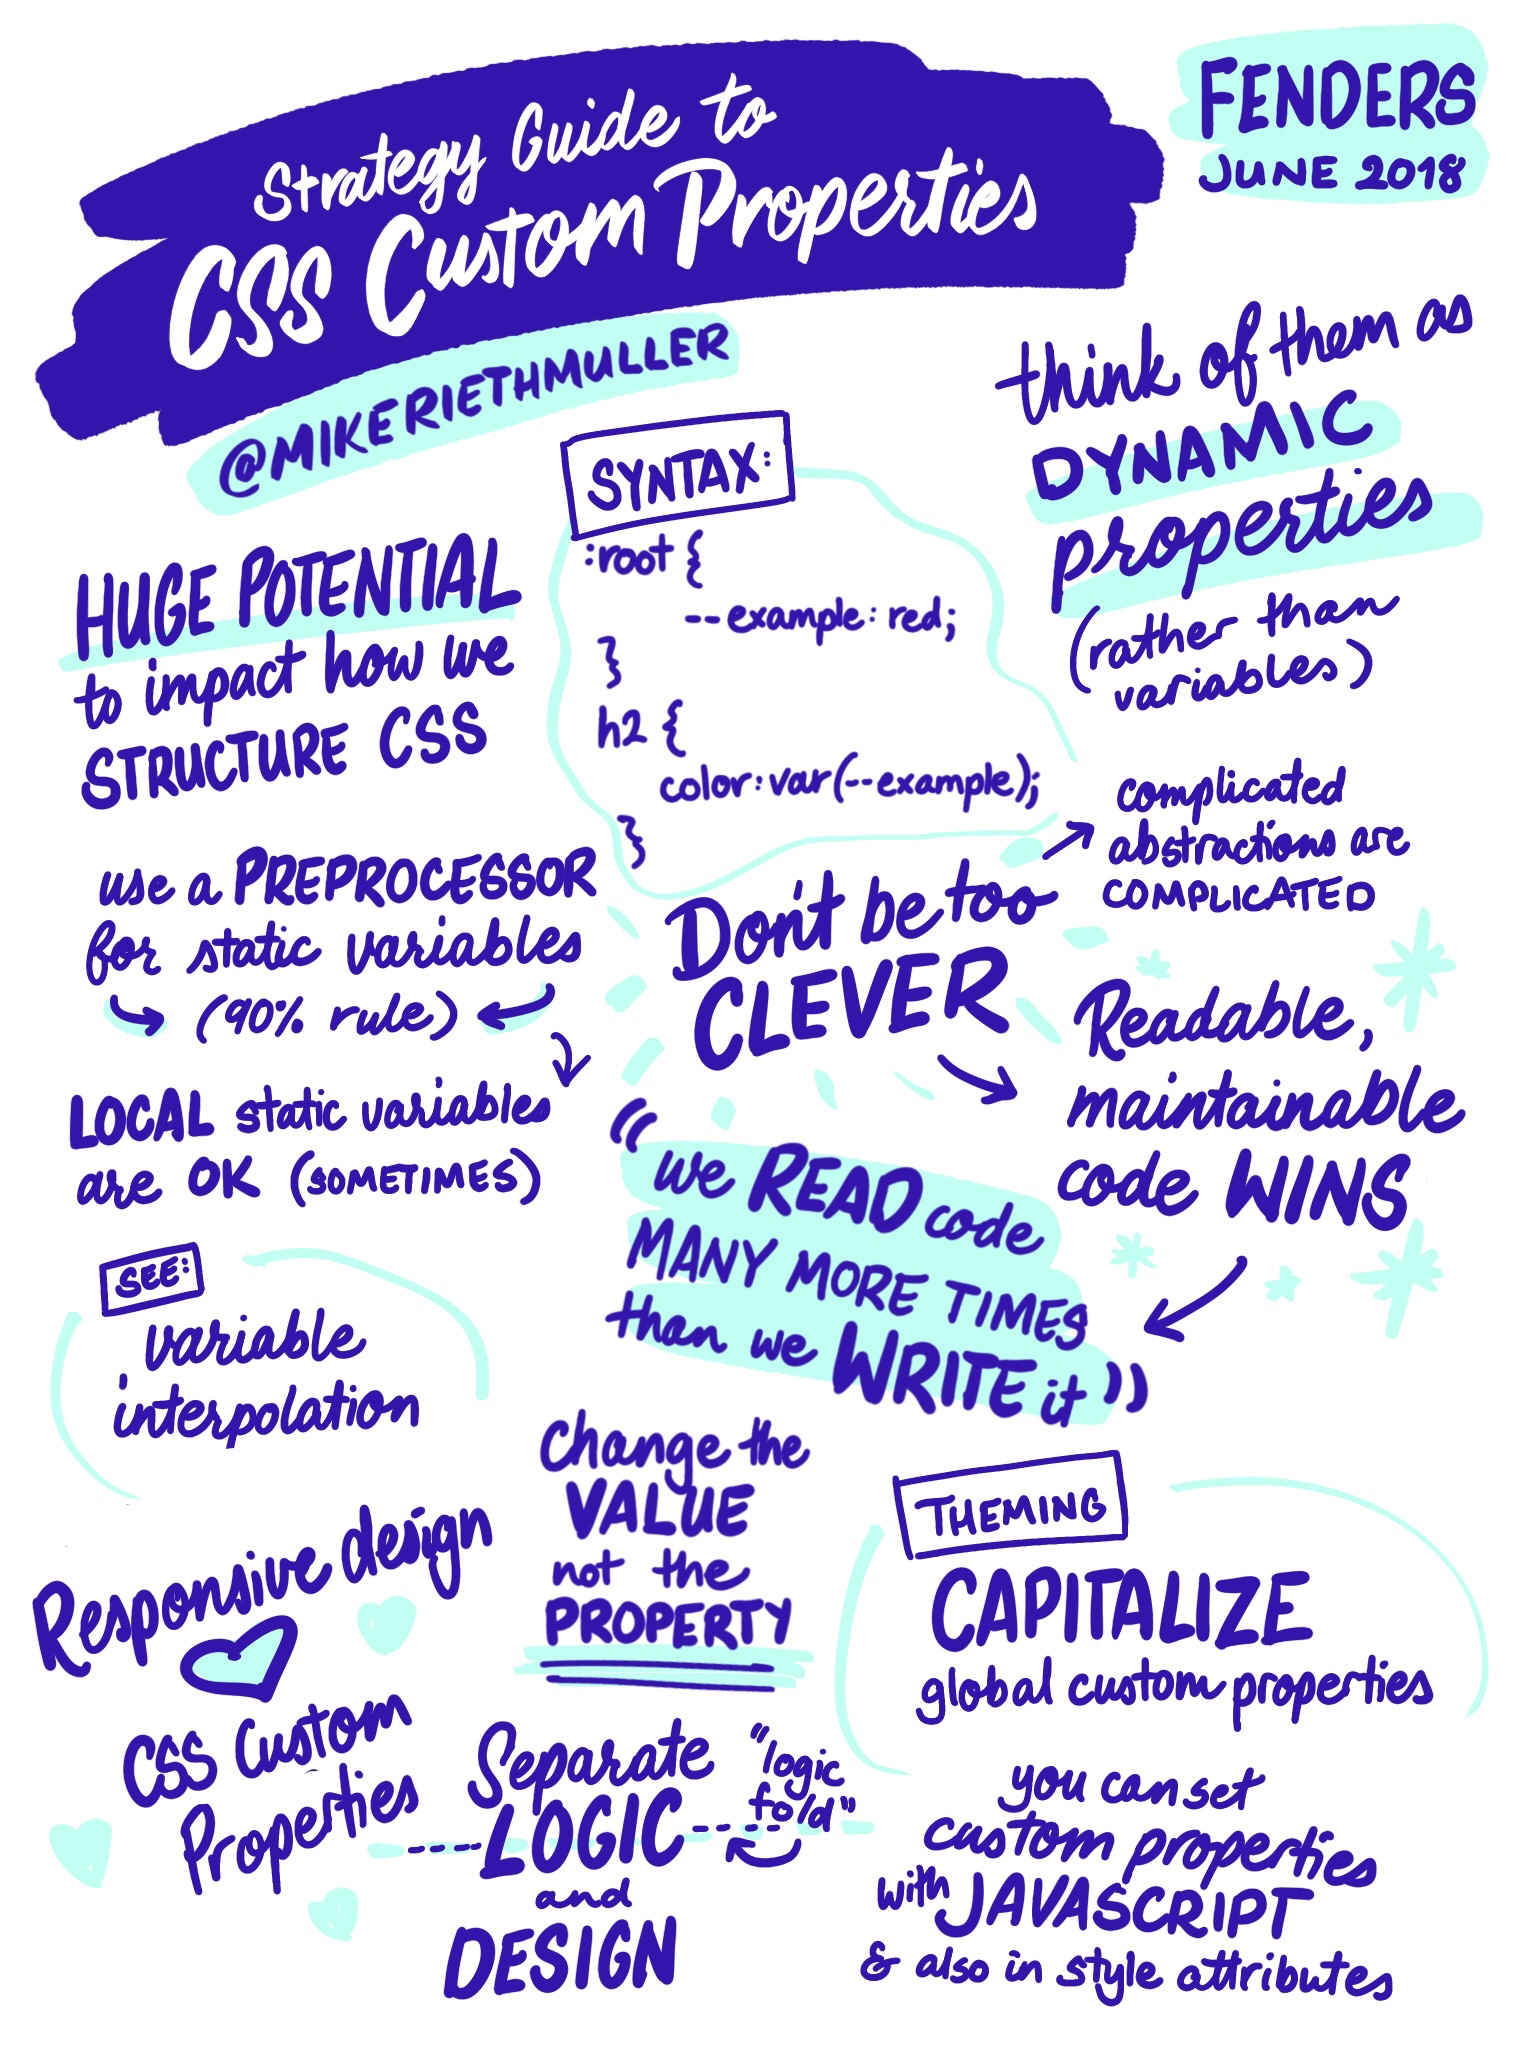 Strategy Guide to CSS Custom Properties sketchnote